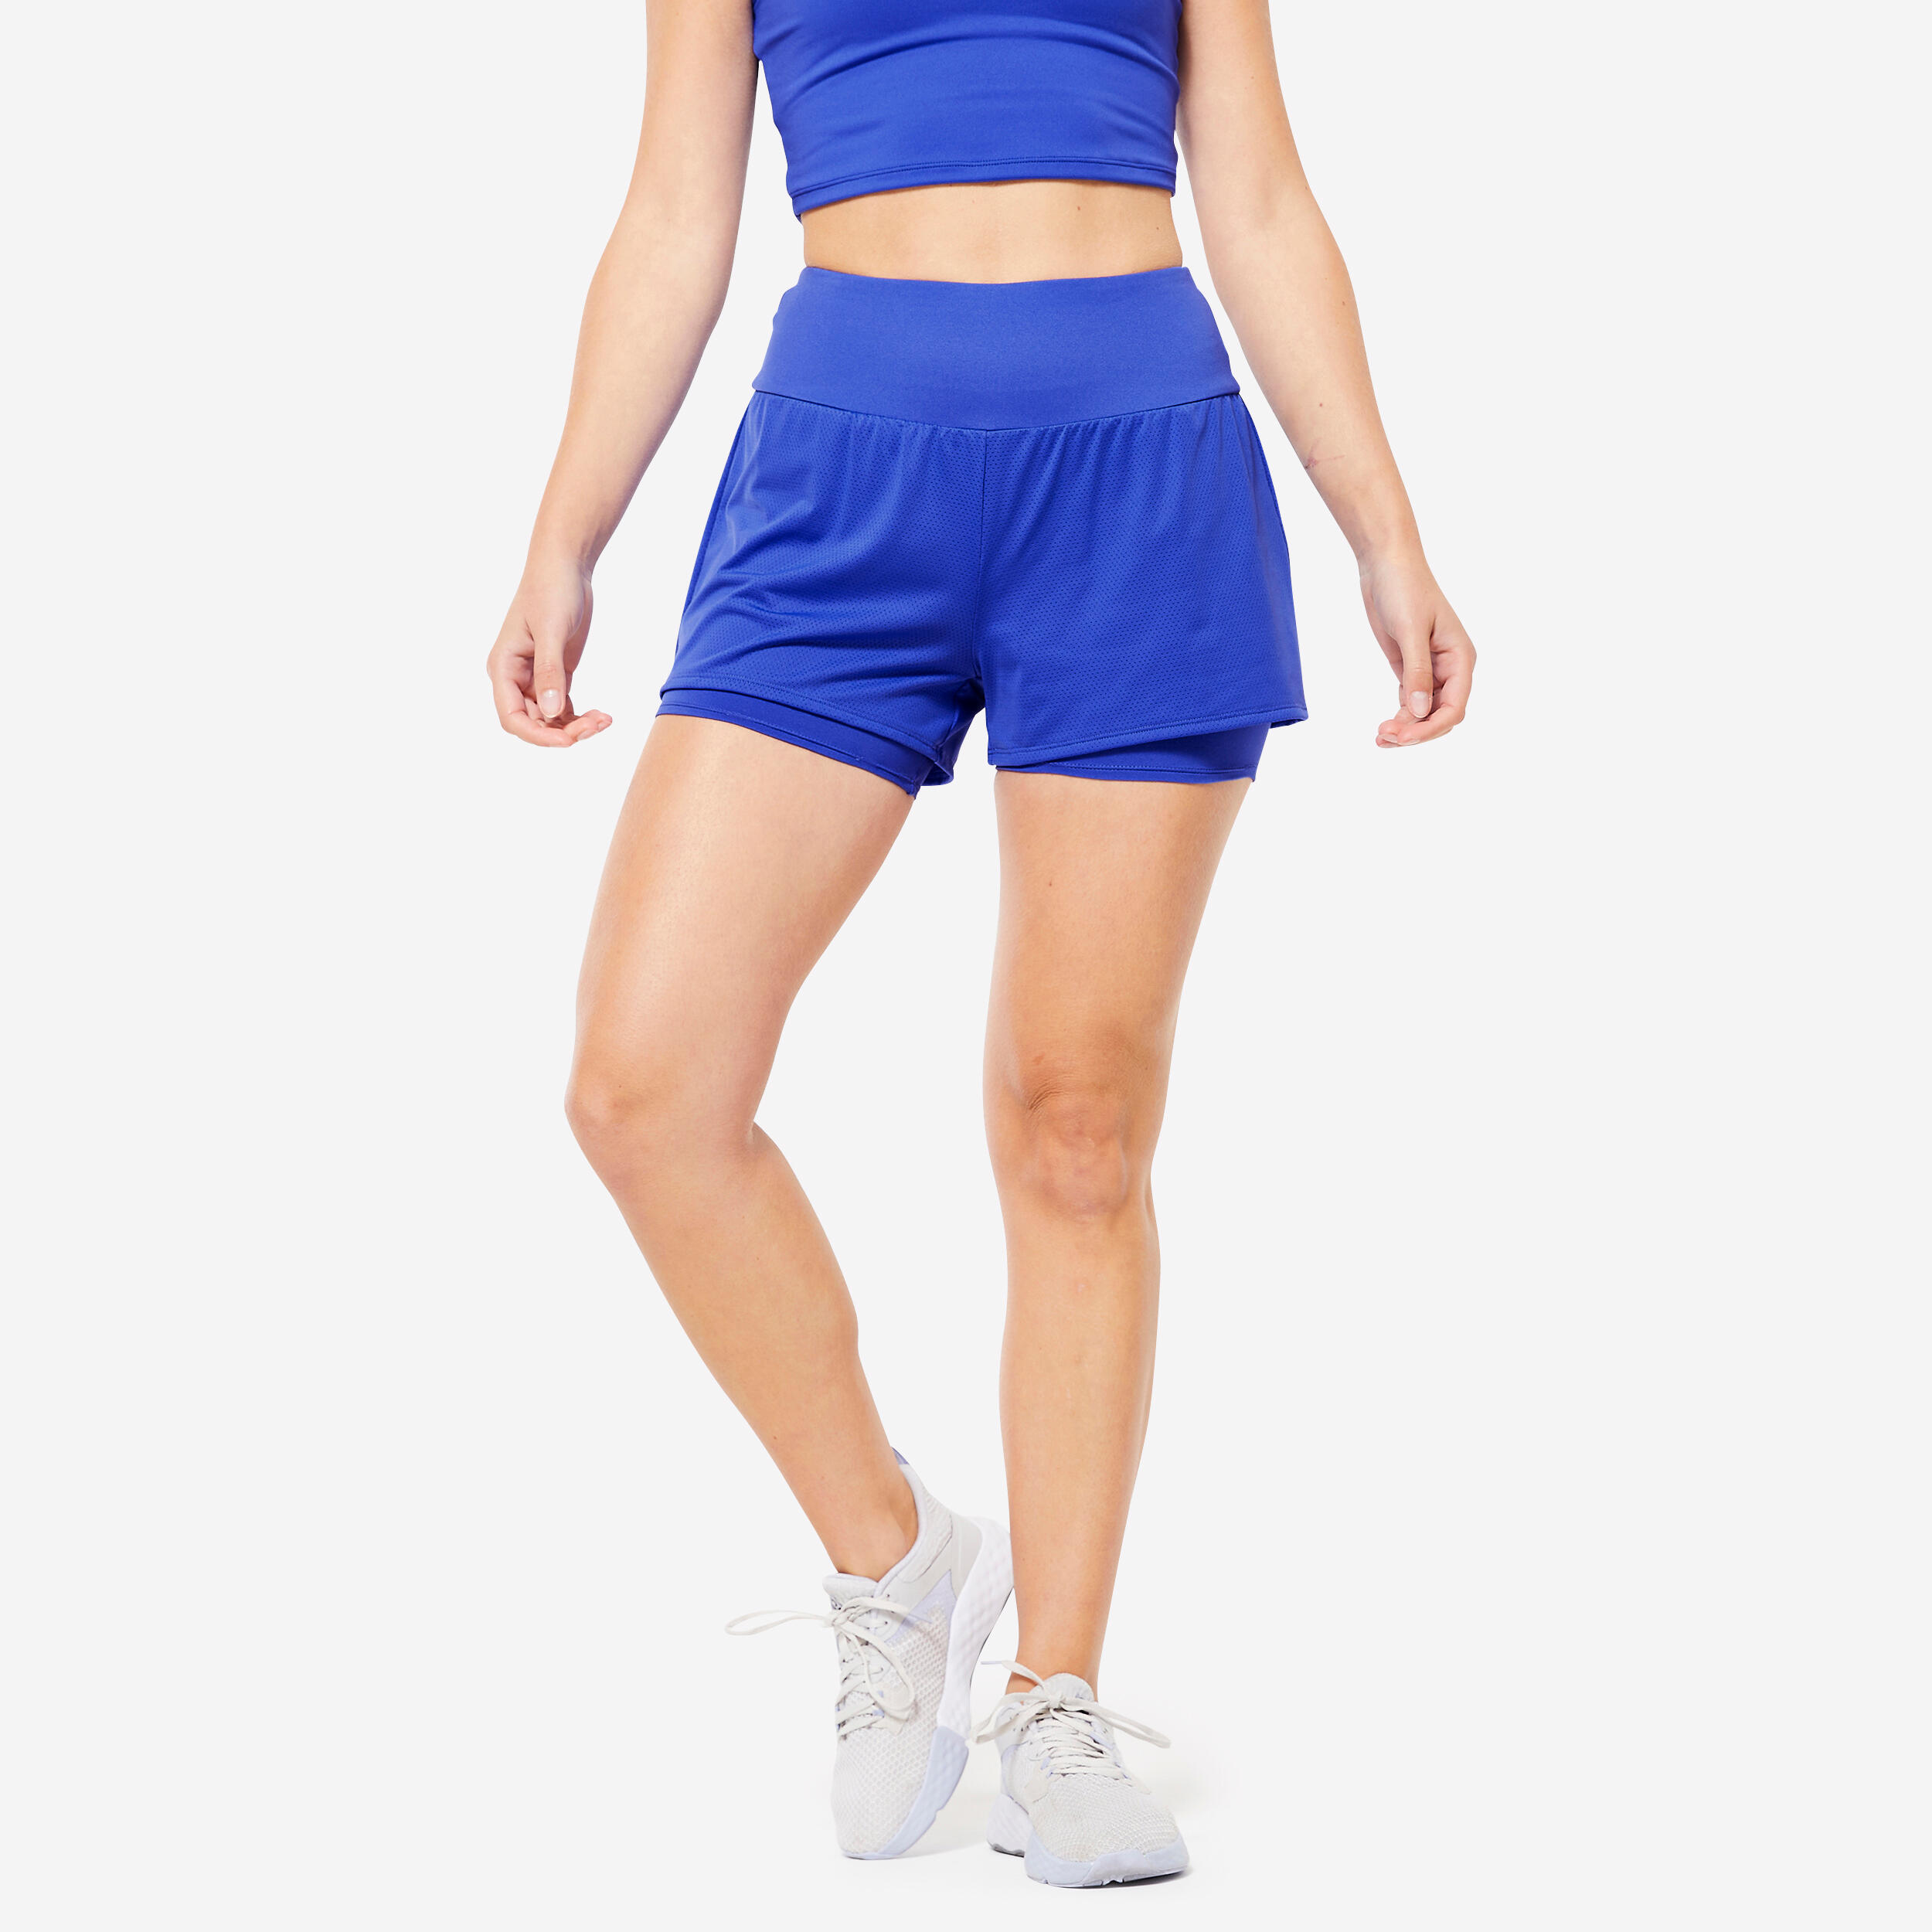 2-in-1 Anti-Chafing Fitness Short Shorts - Blue 1/5